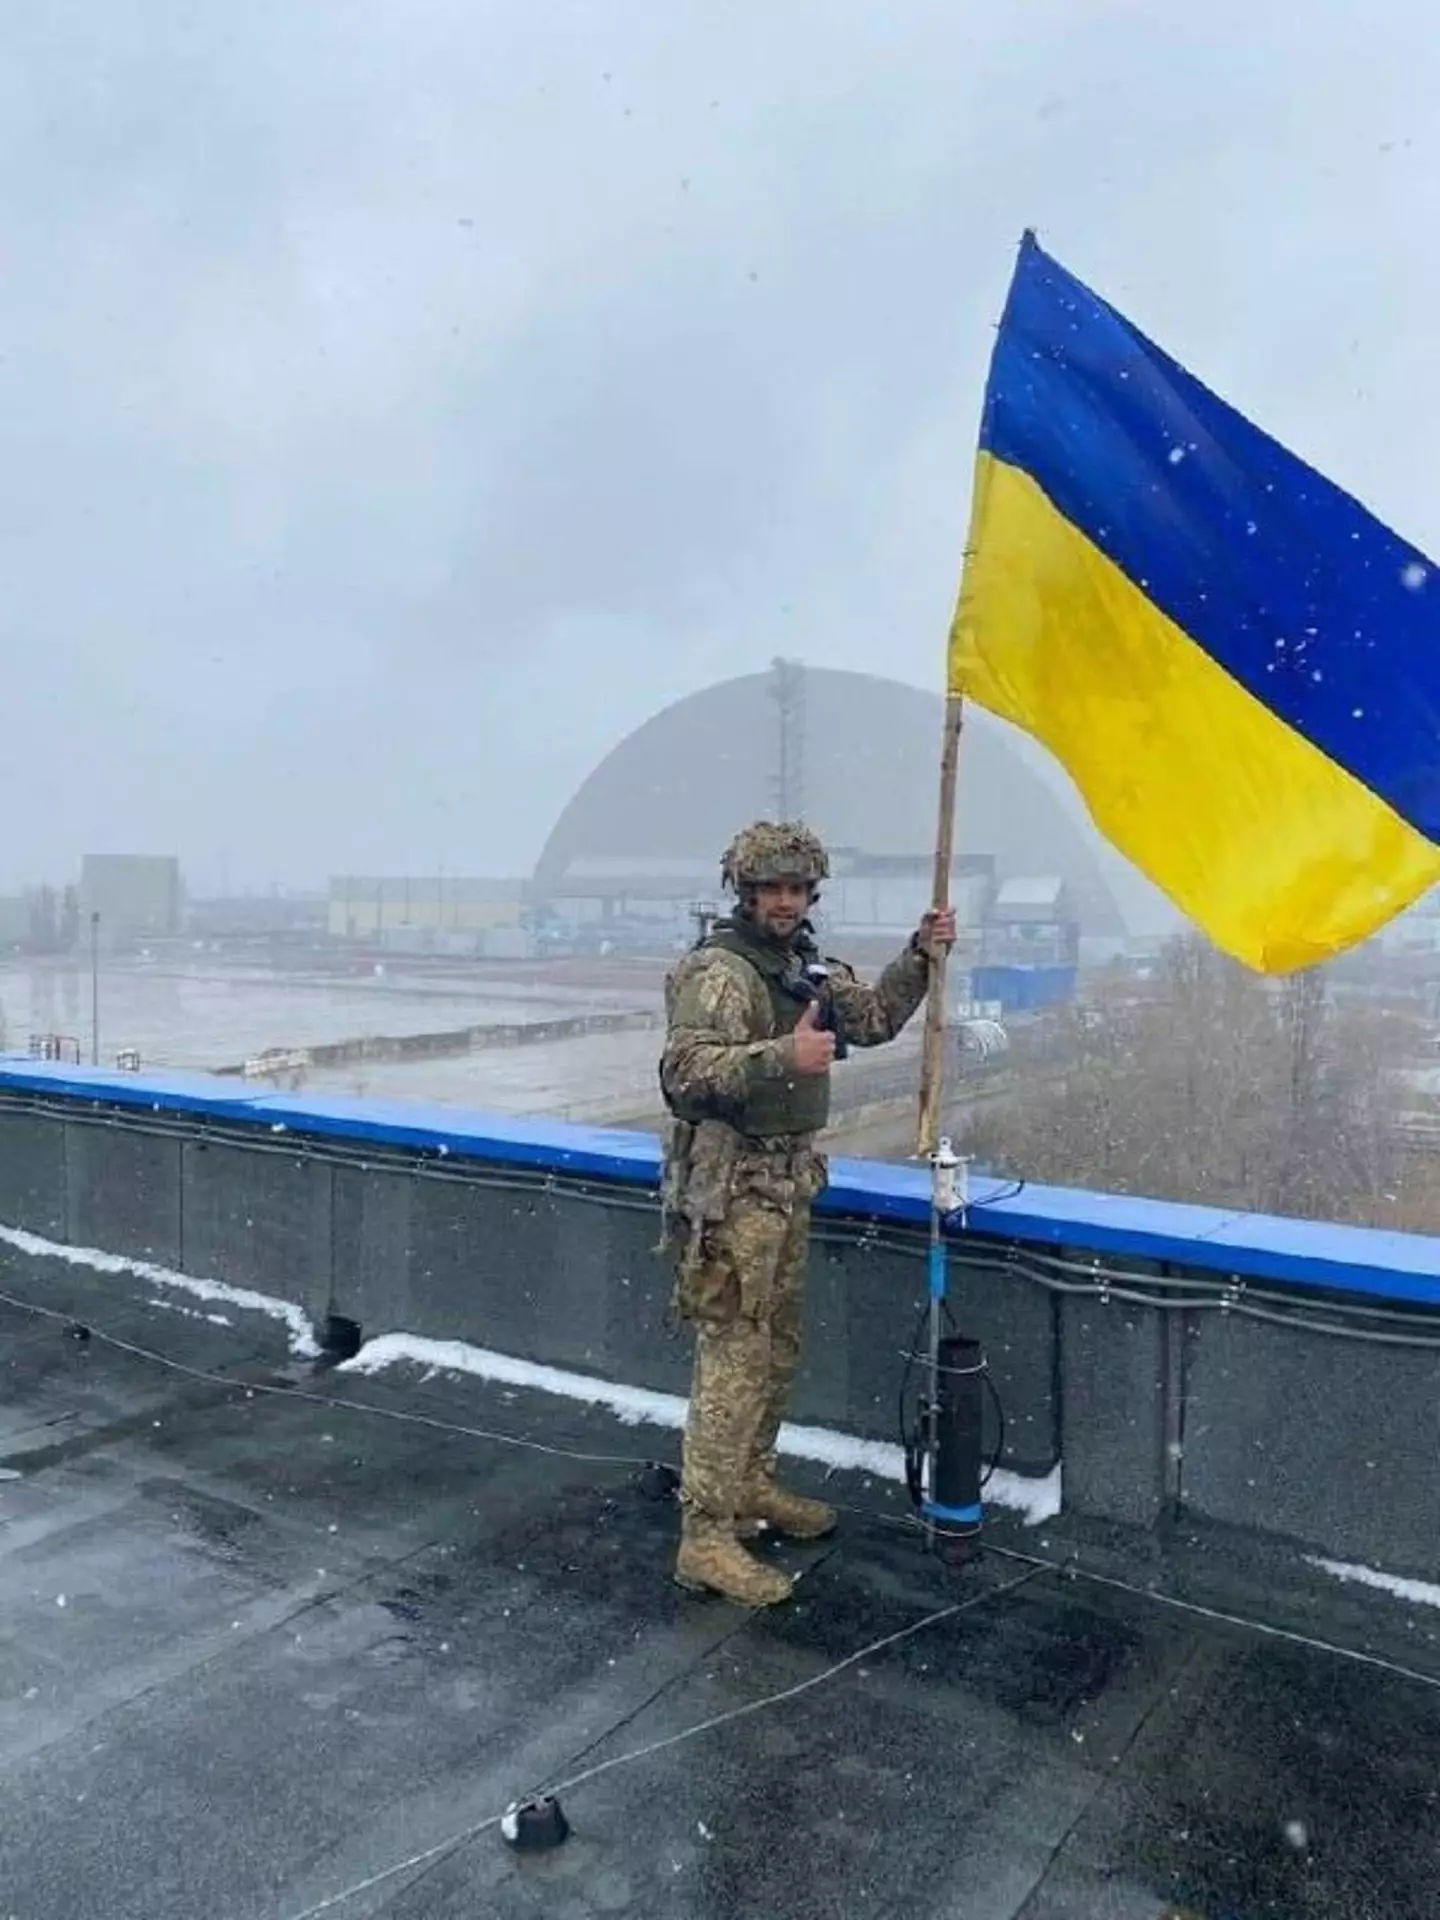 A Ukrainian soldier holding the flag at Chernobyl.